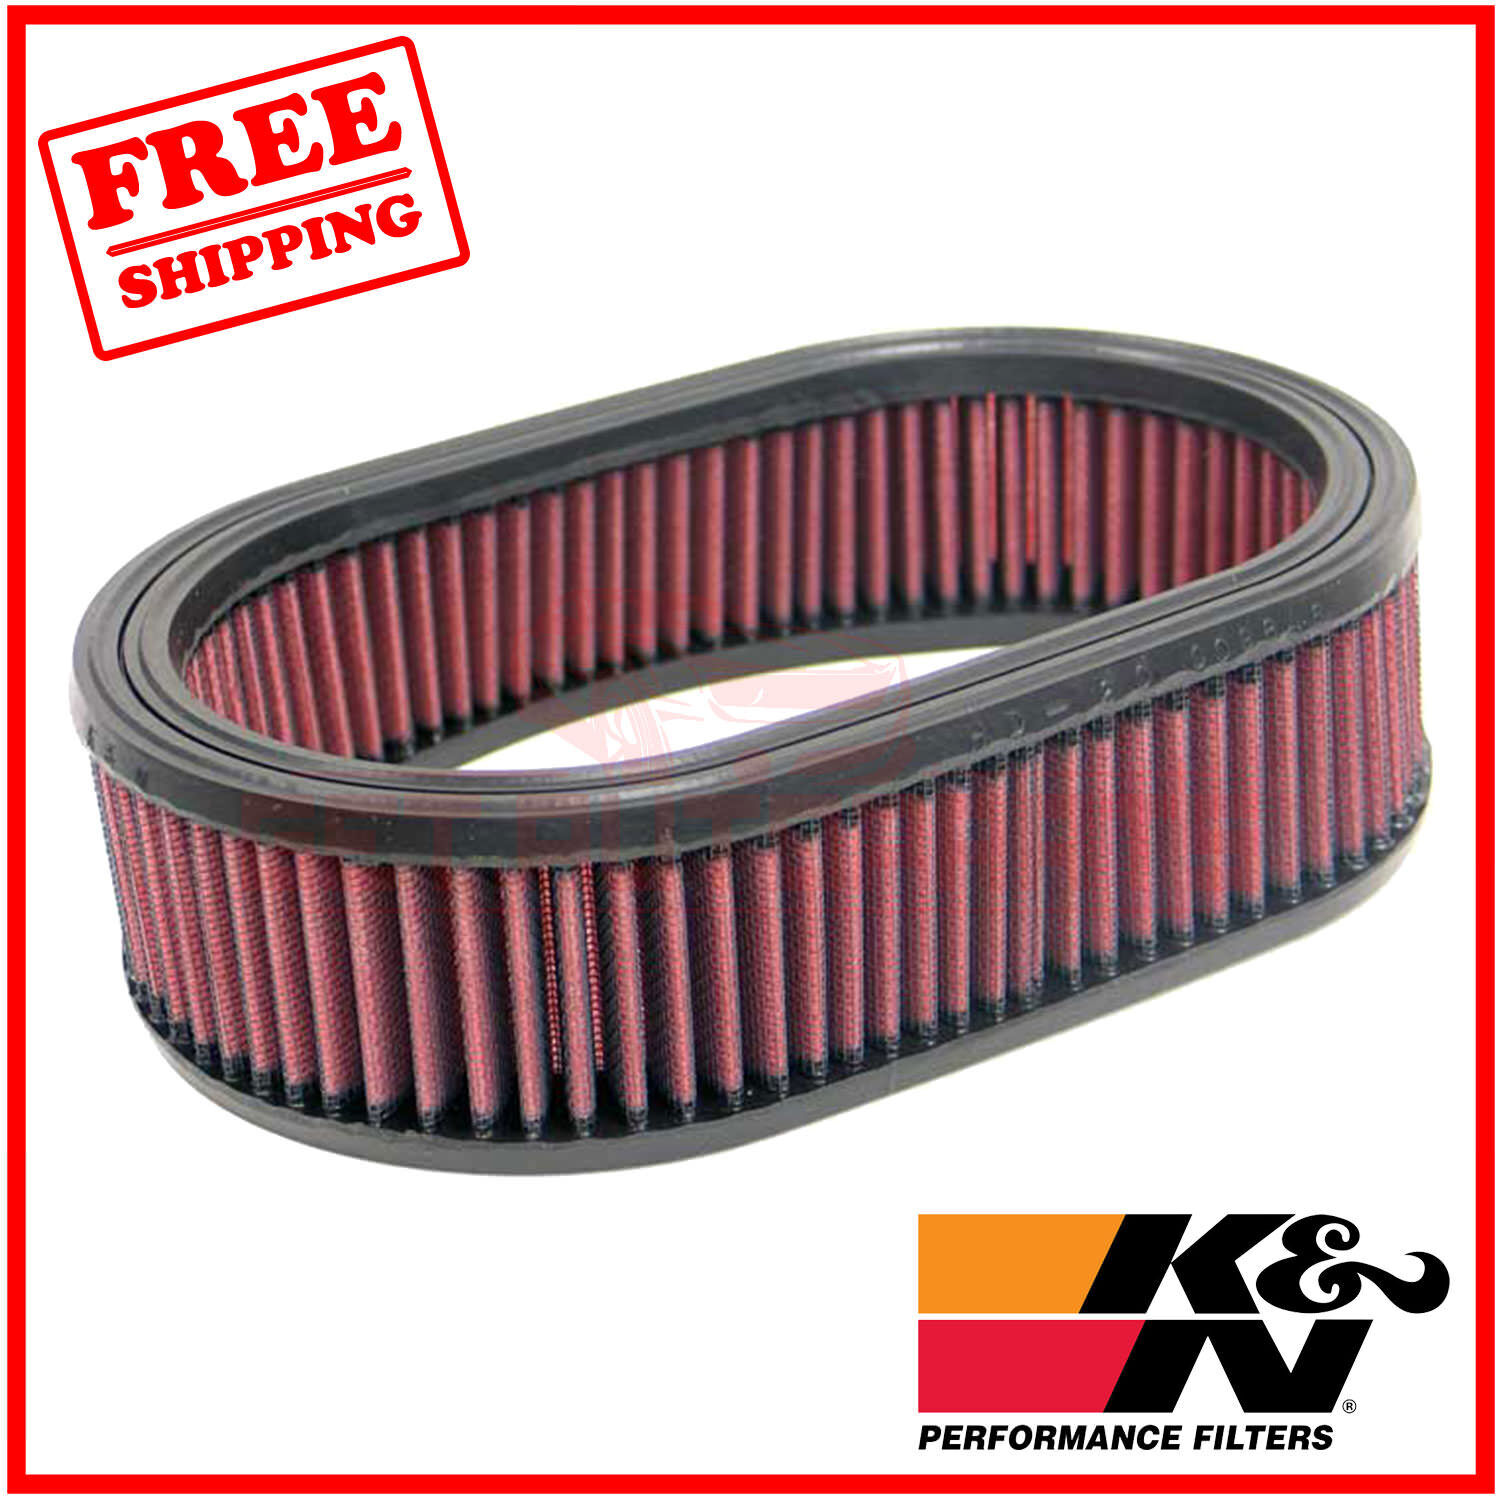 K&N Replacement Air Filter for Harley Davidson FLH Electra Glide 1976-1978